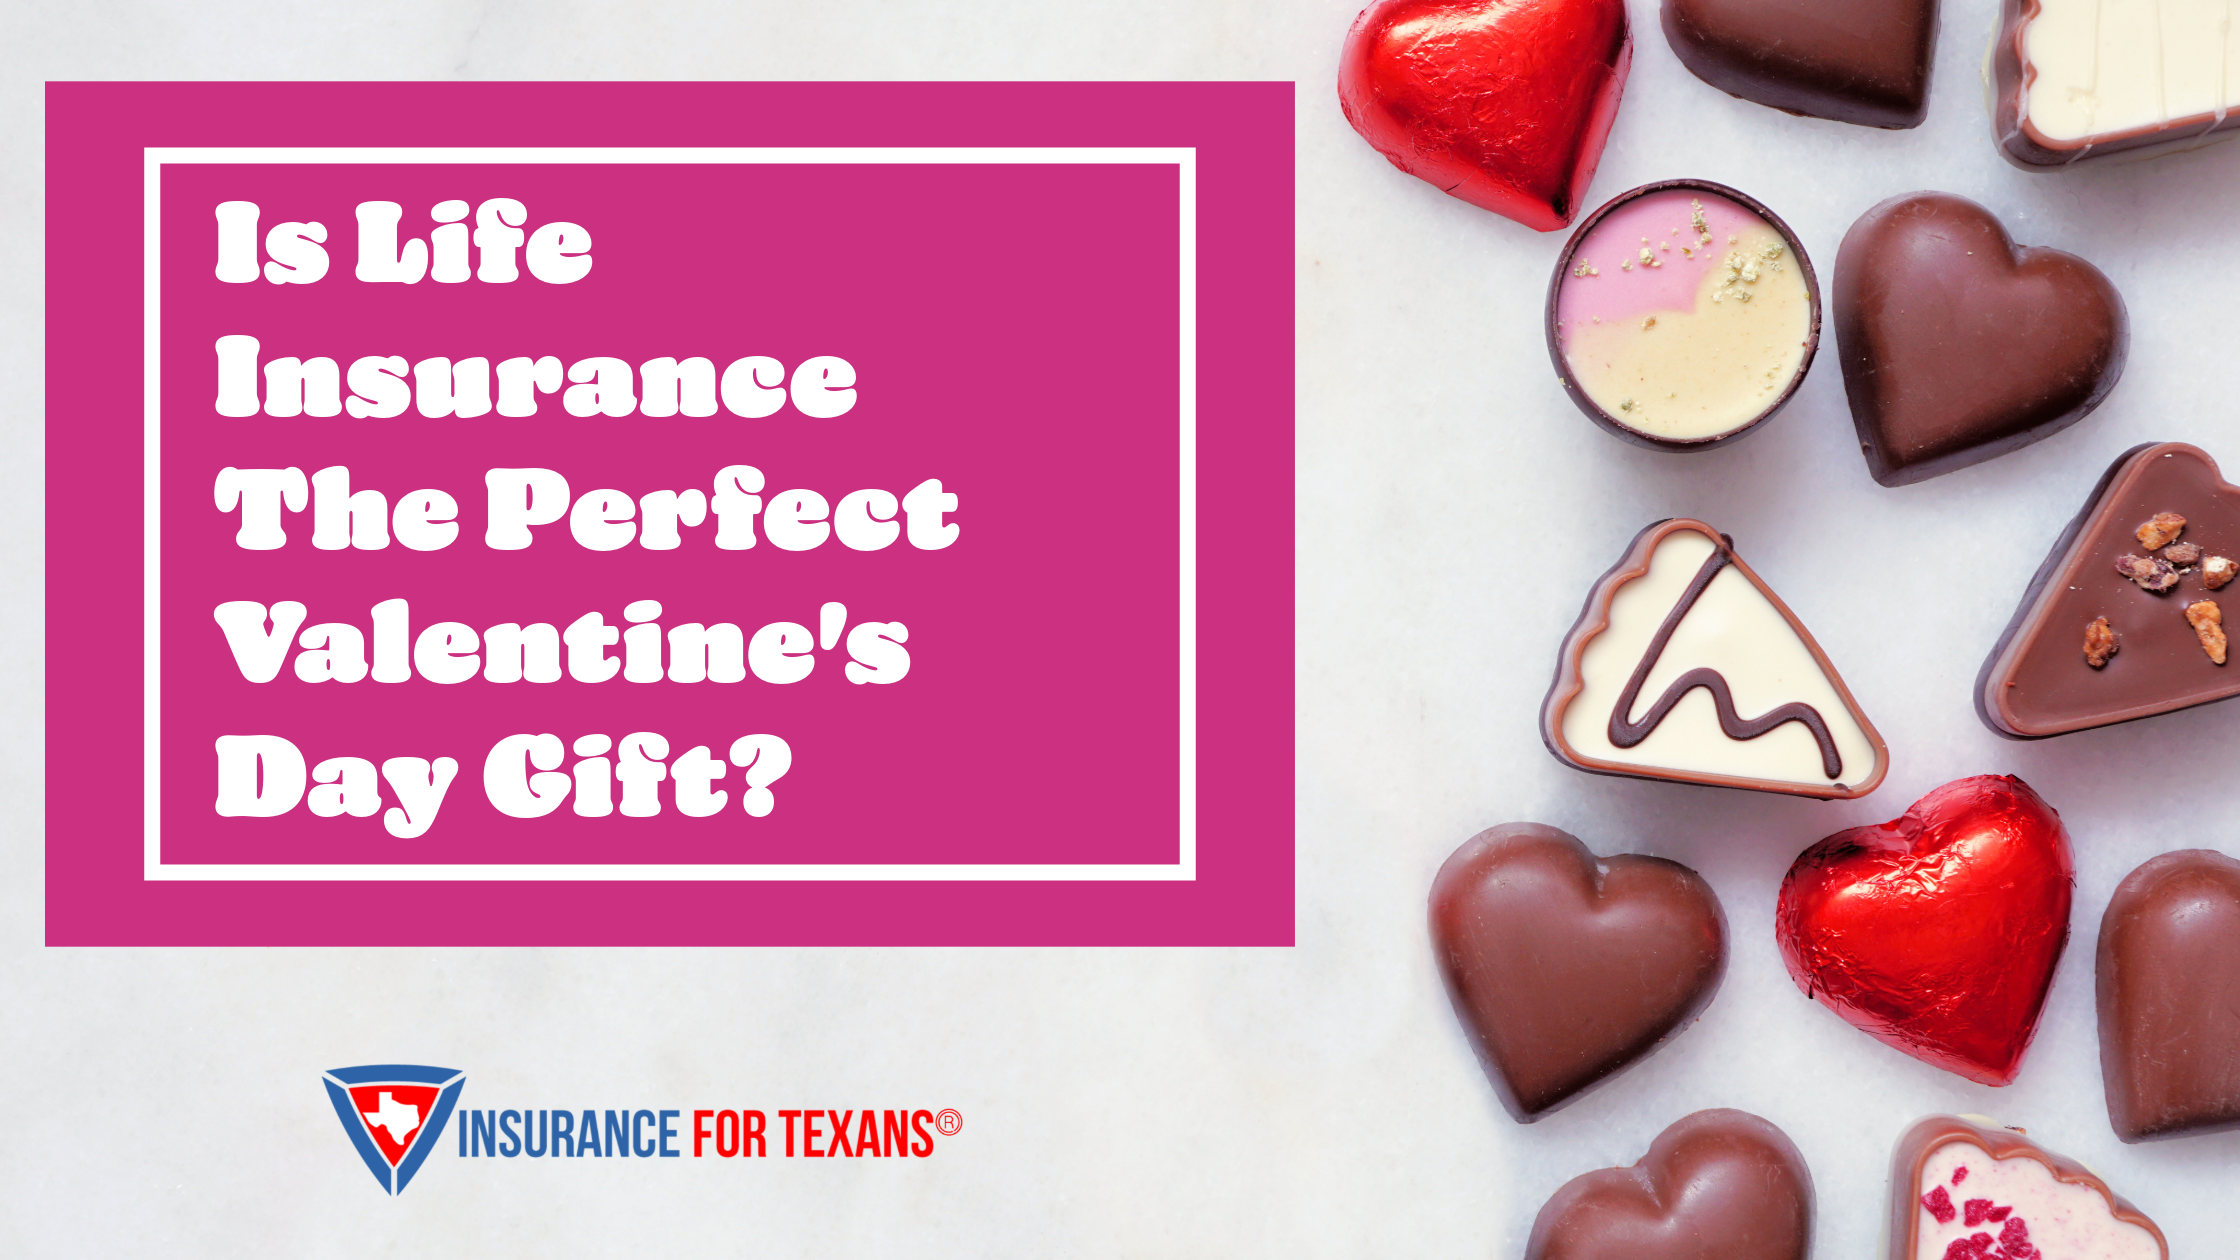 Is Life Insurance the Perfect Valentine's Day Gift?